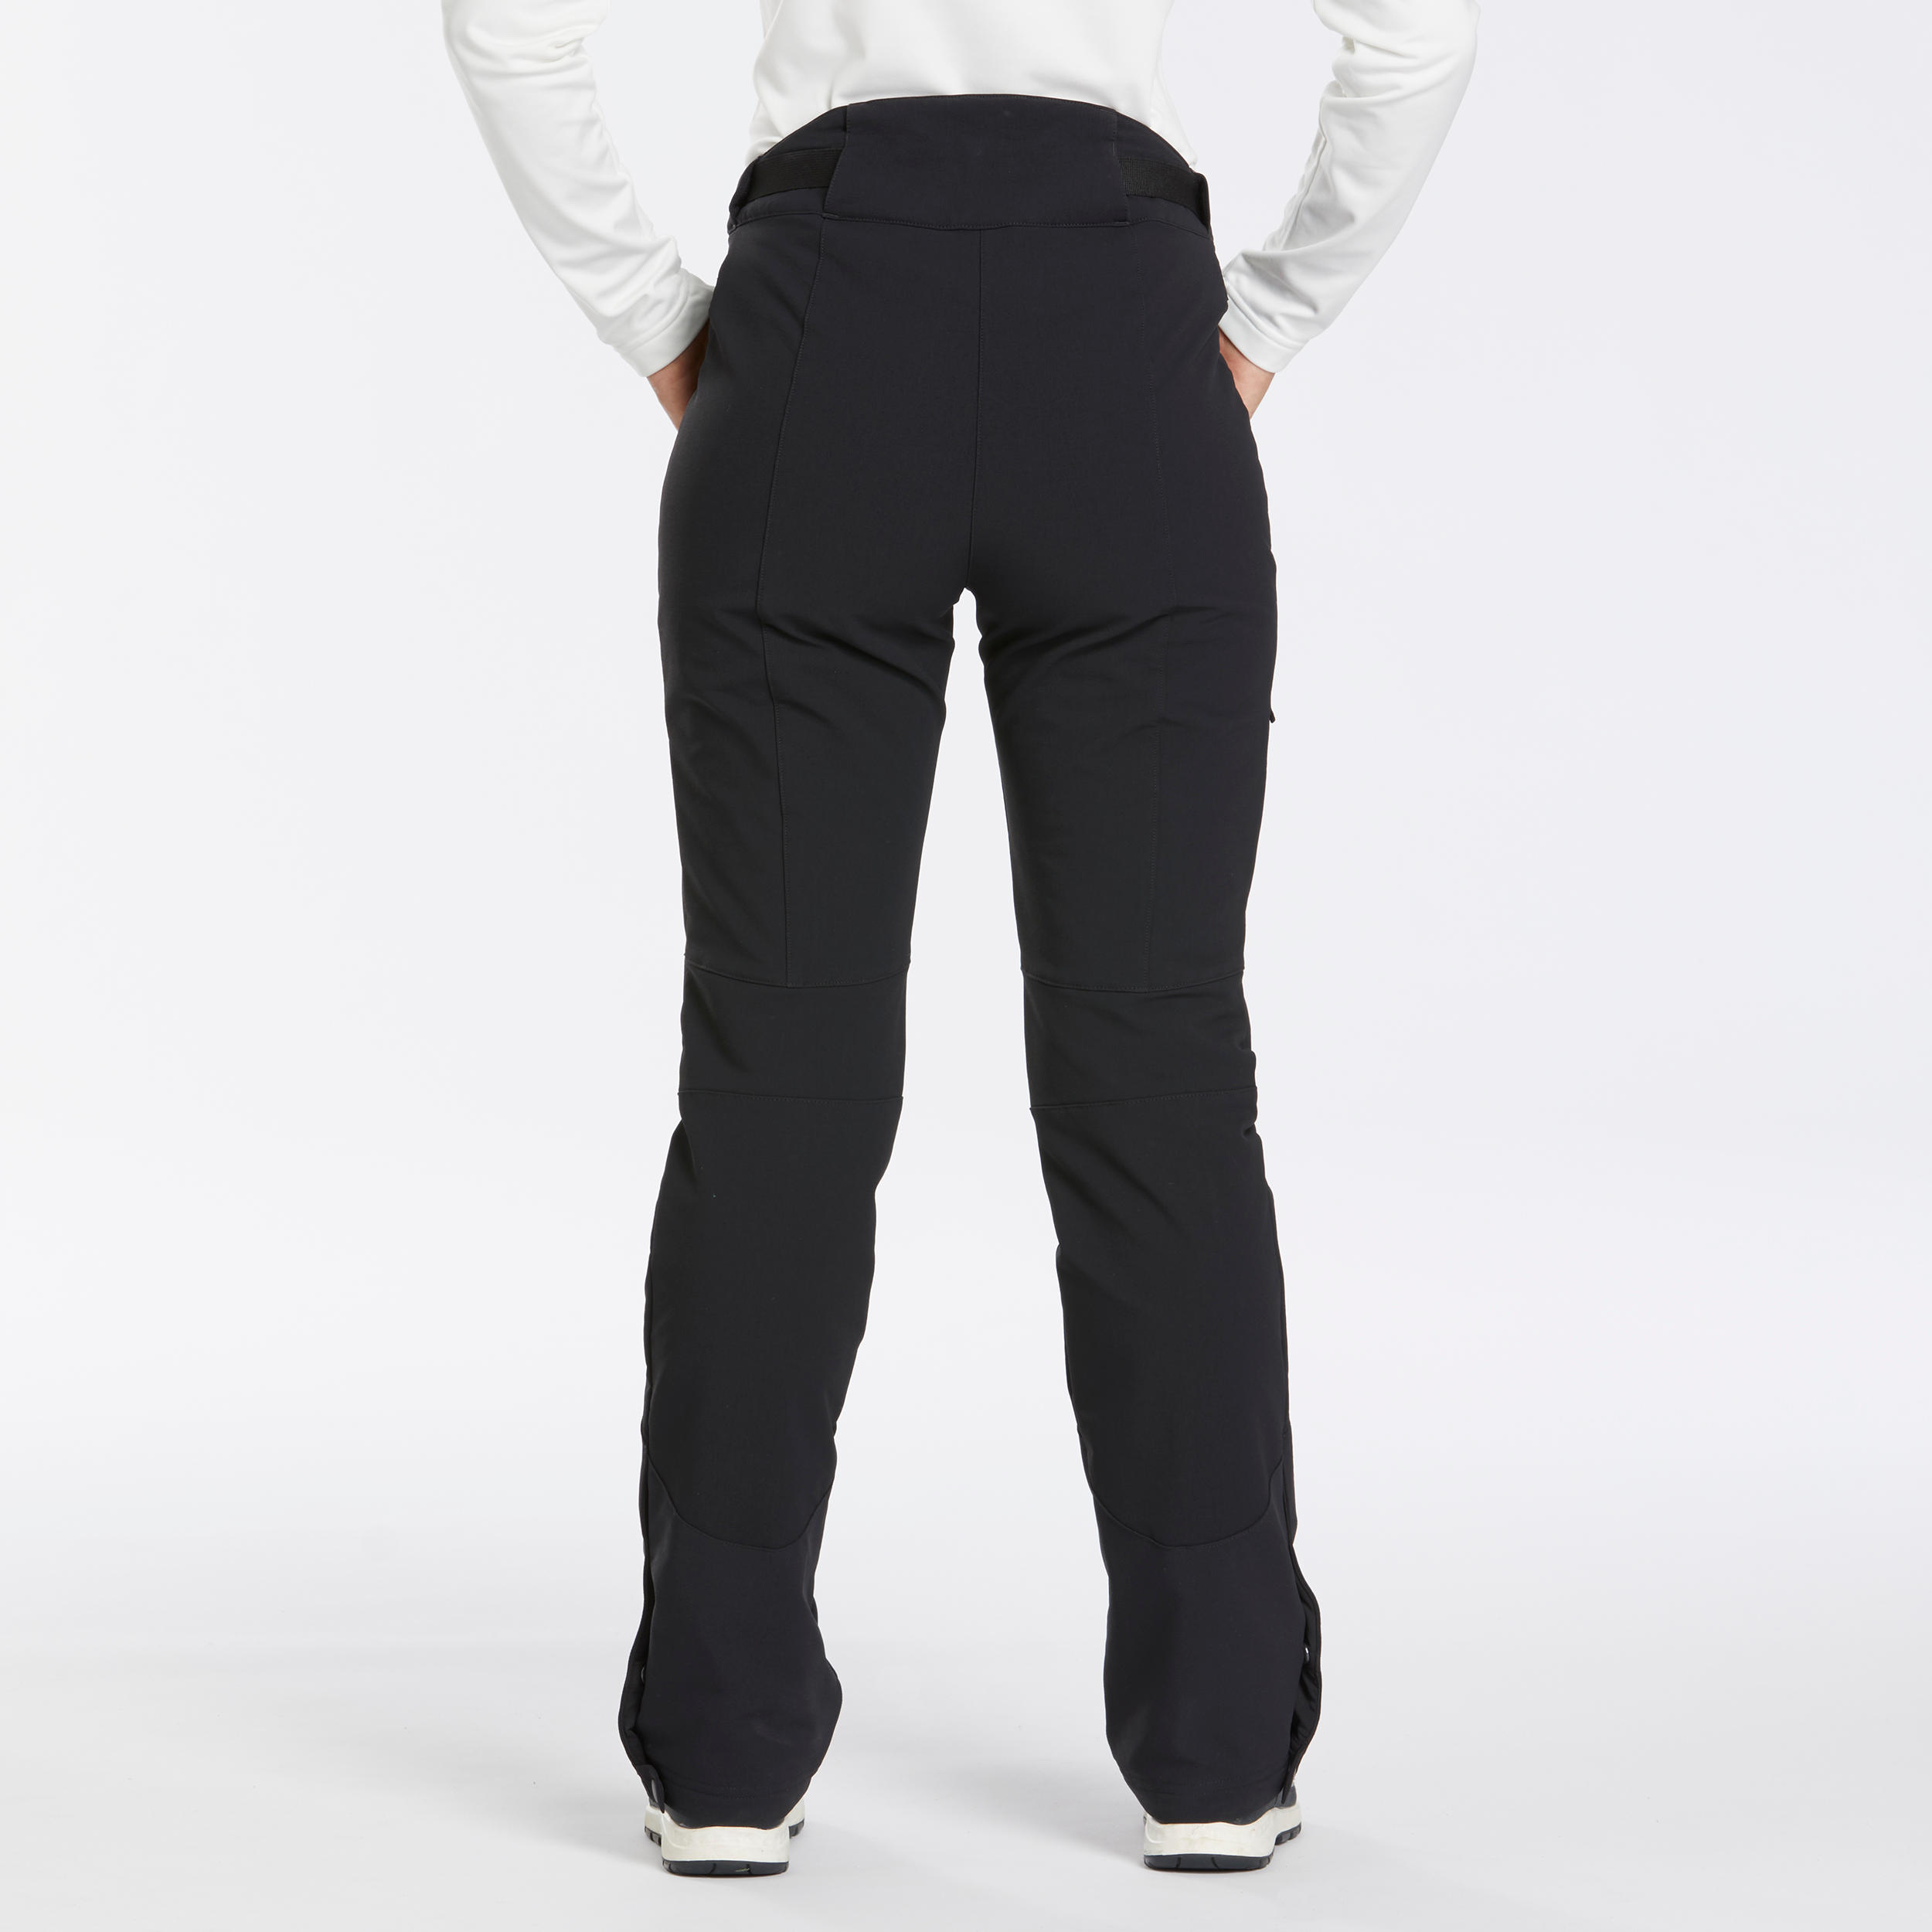 Buy Latest 4 Way Stretch Trousers Online at Best Price  House of Stori